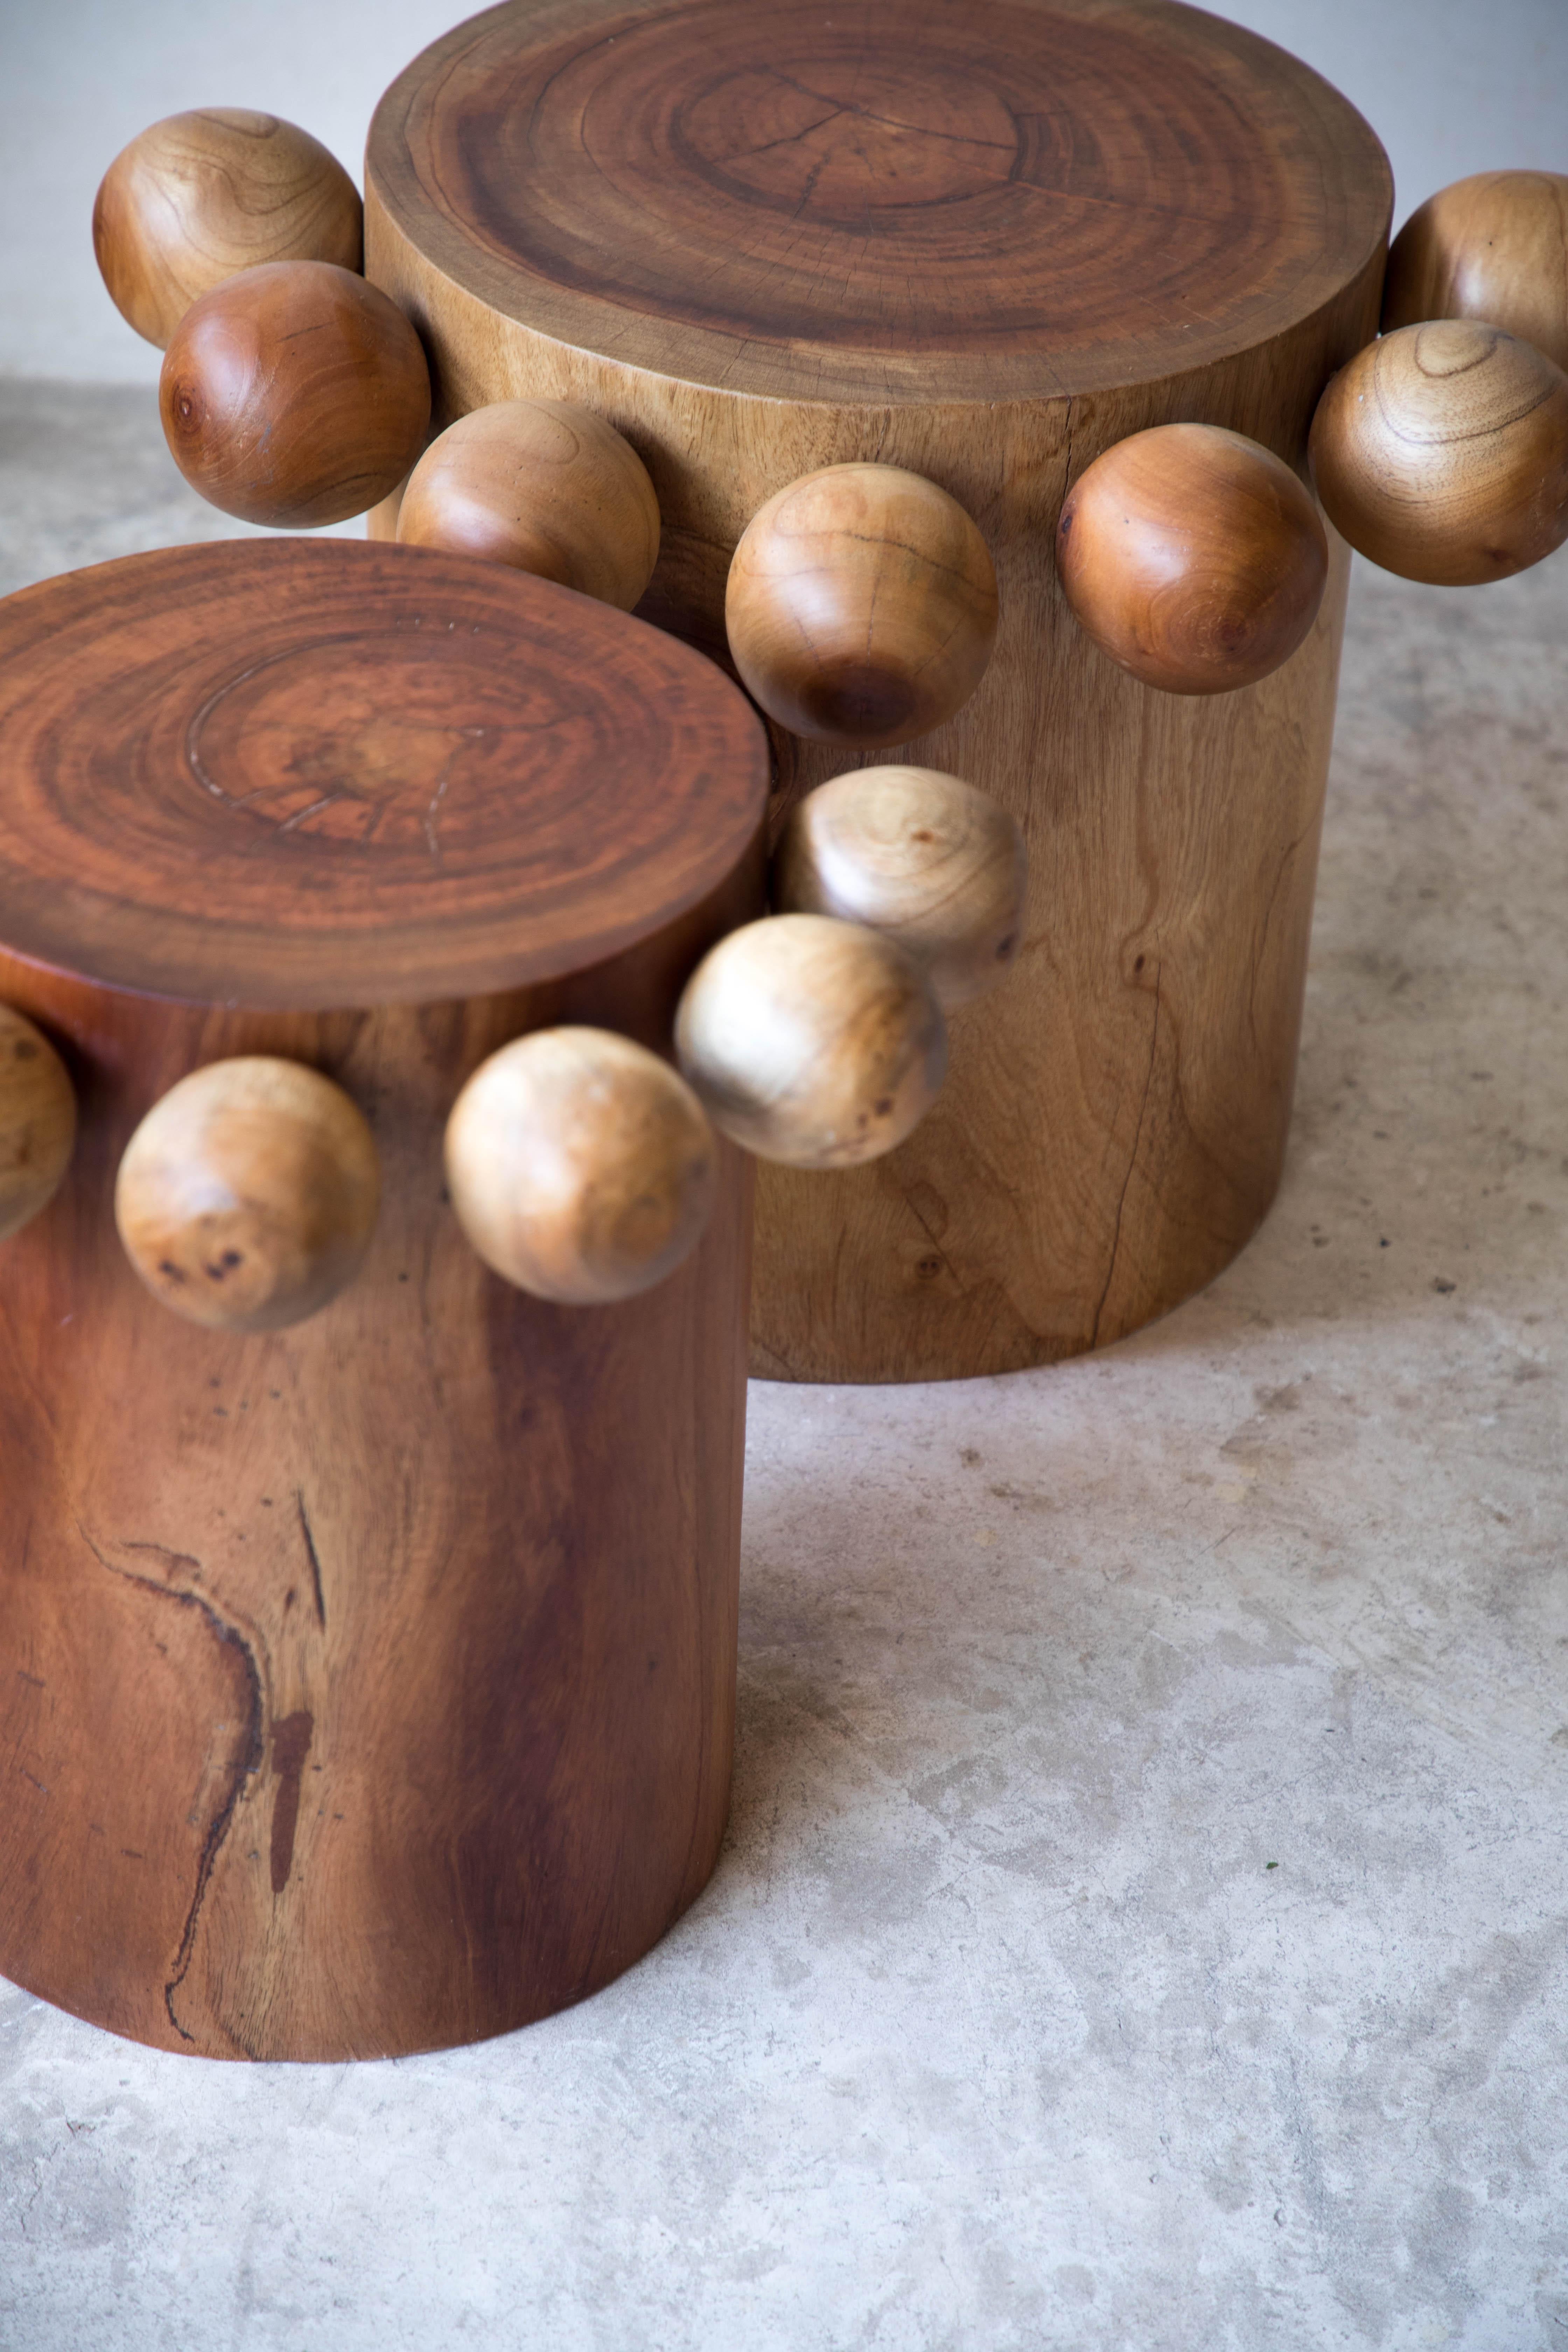 Small Jabin totem with spheres by Daniel Orozco
Material: Solid jabin wood.
Dimensions: D 38.1 x H 45.7 cm
Available in 2 sizes: 50 x 45, 38 x 45 cm.

Solid jabin wood Totem with spheres, matte finish. Handmade by Mexican artisans.

Daniel